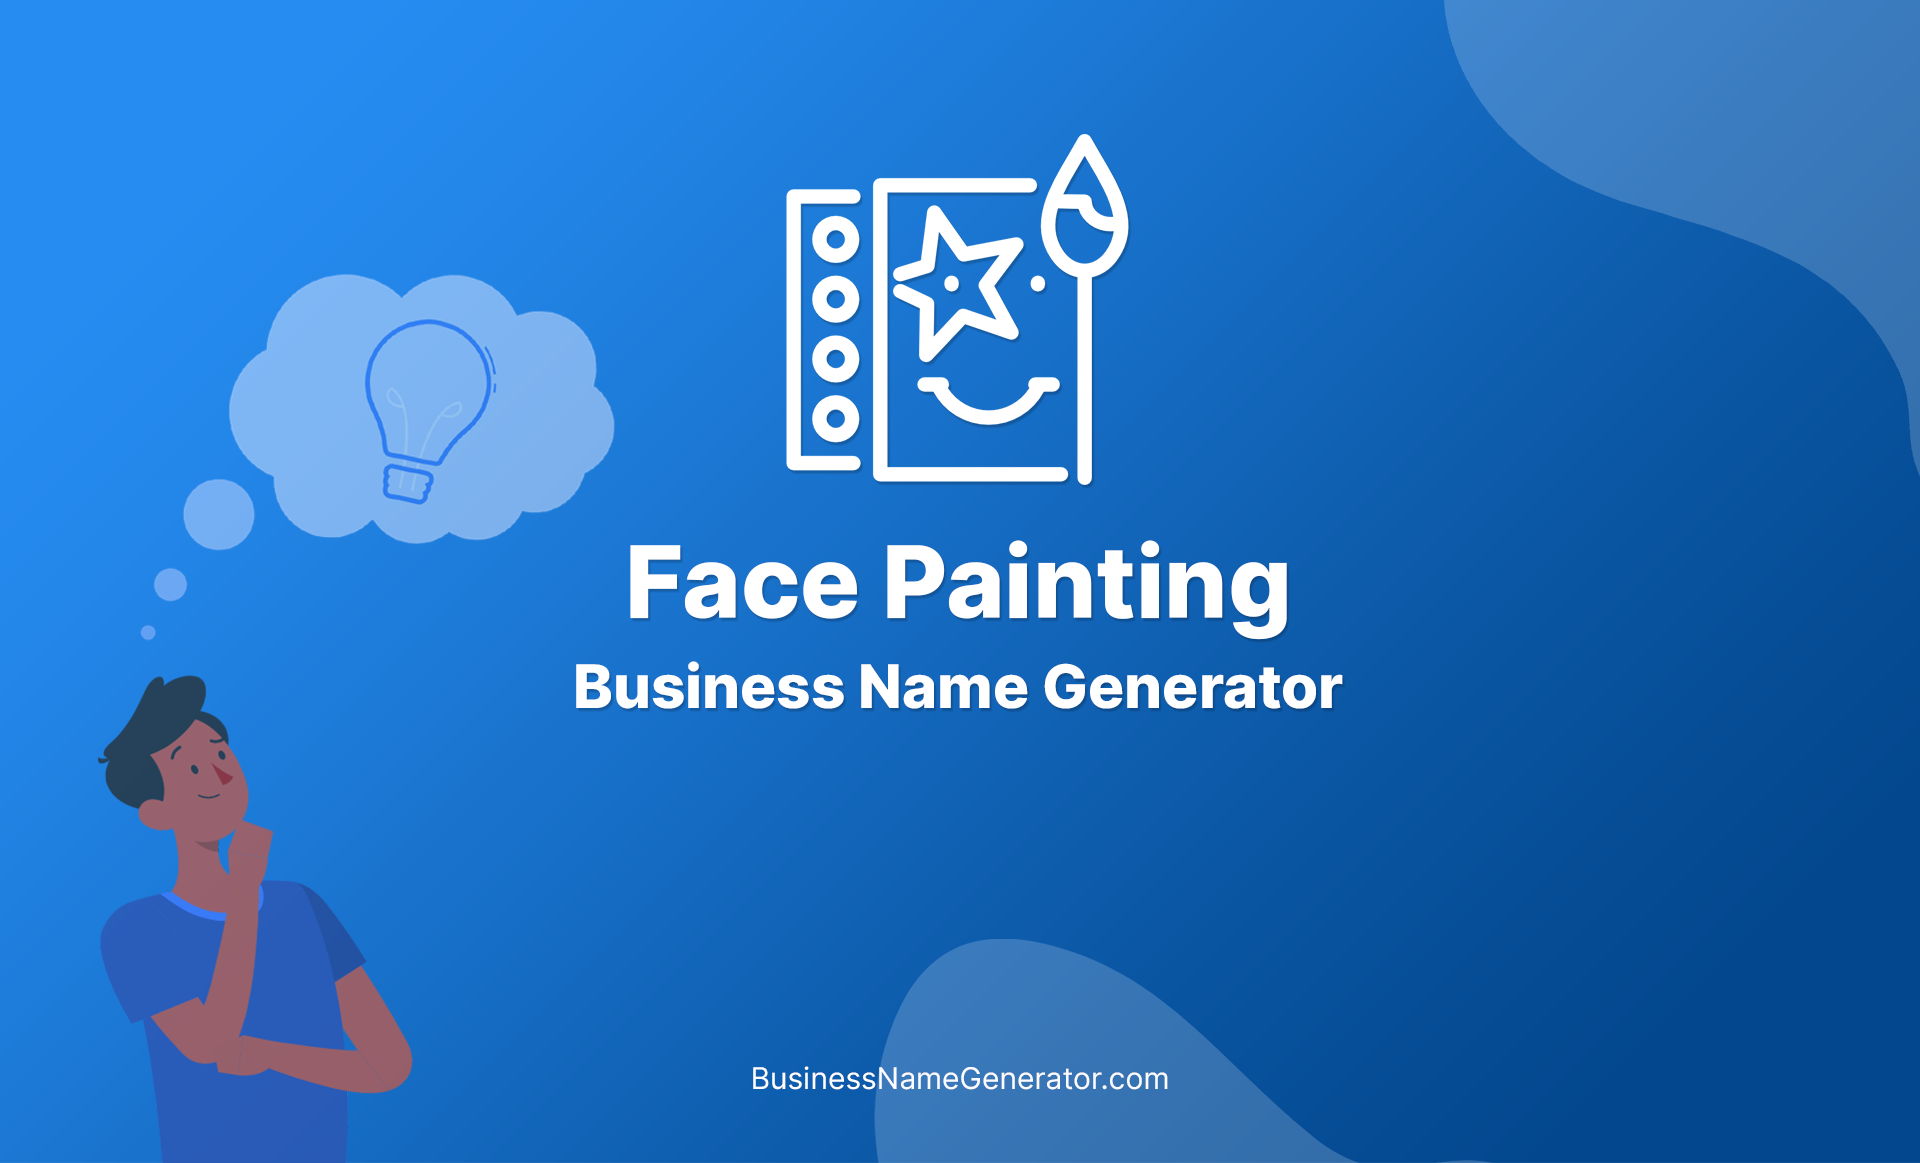 Face Painting Business Name Generator